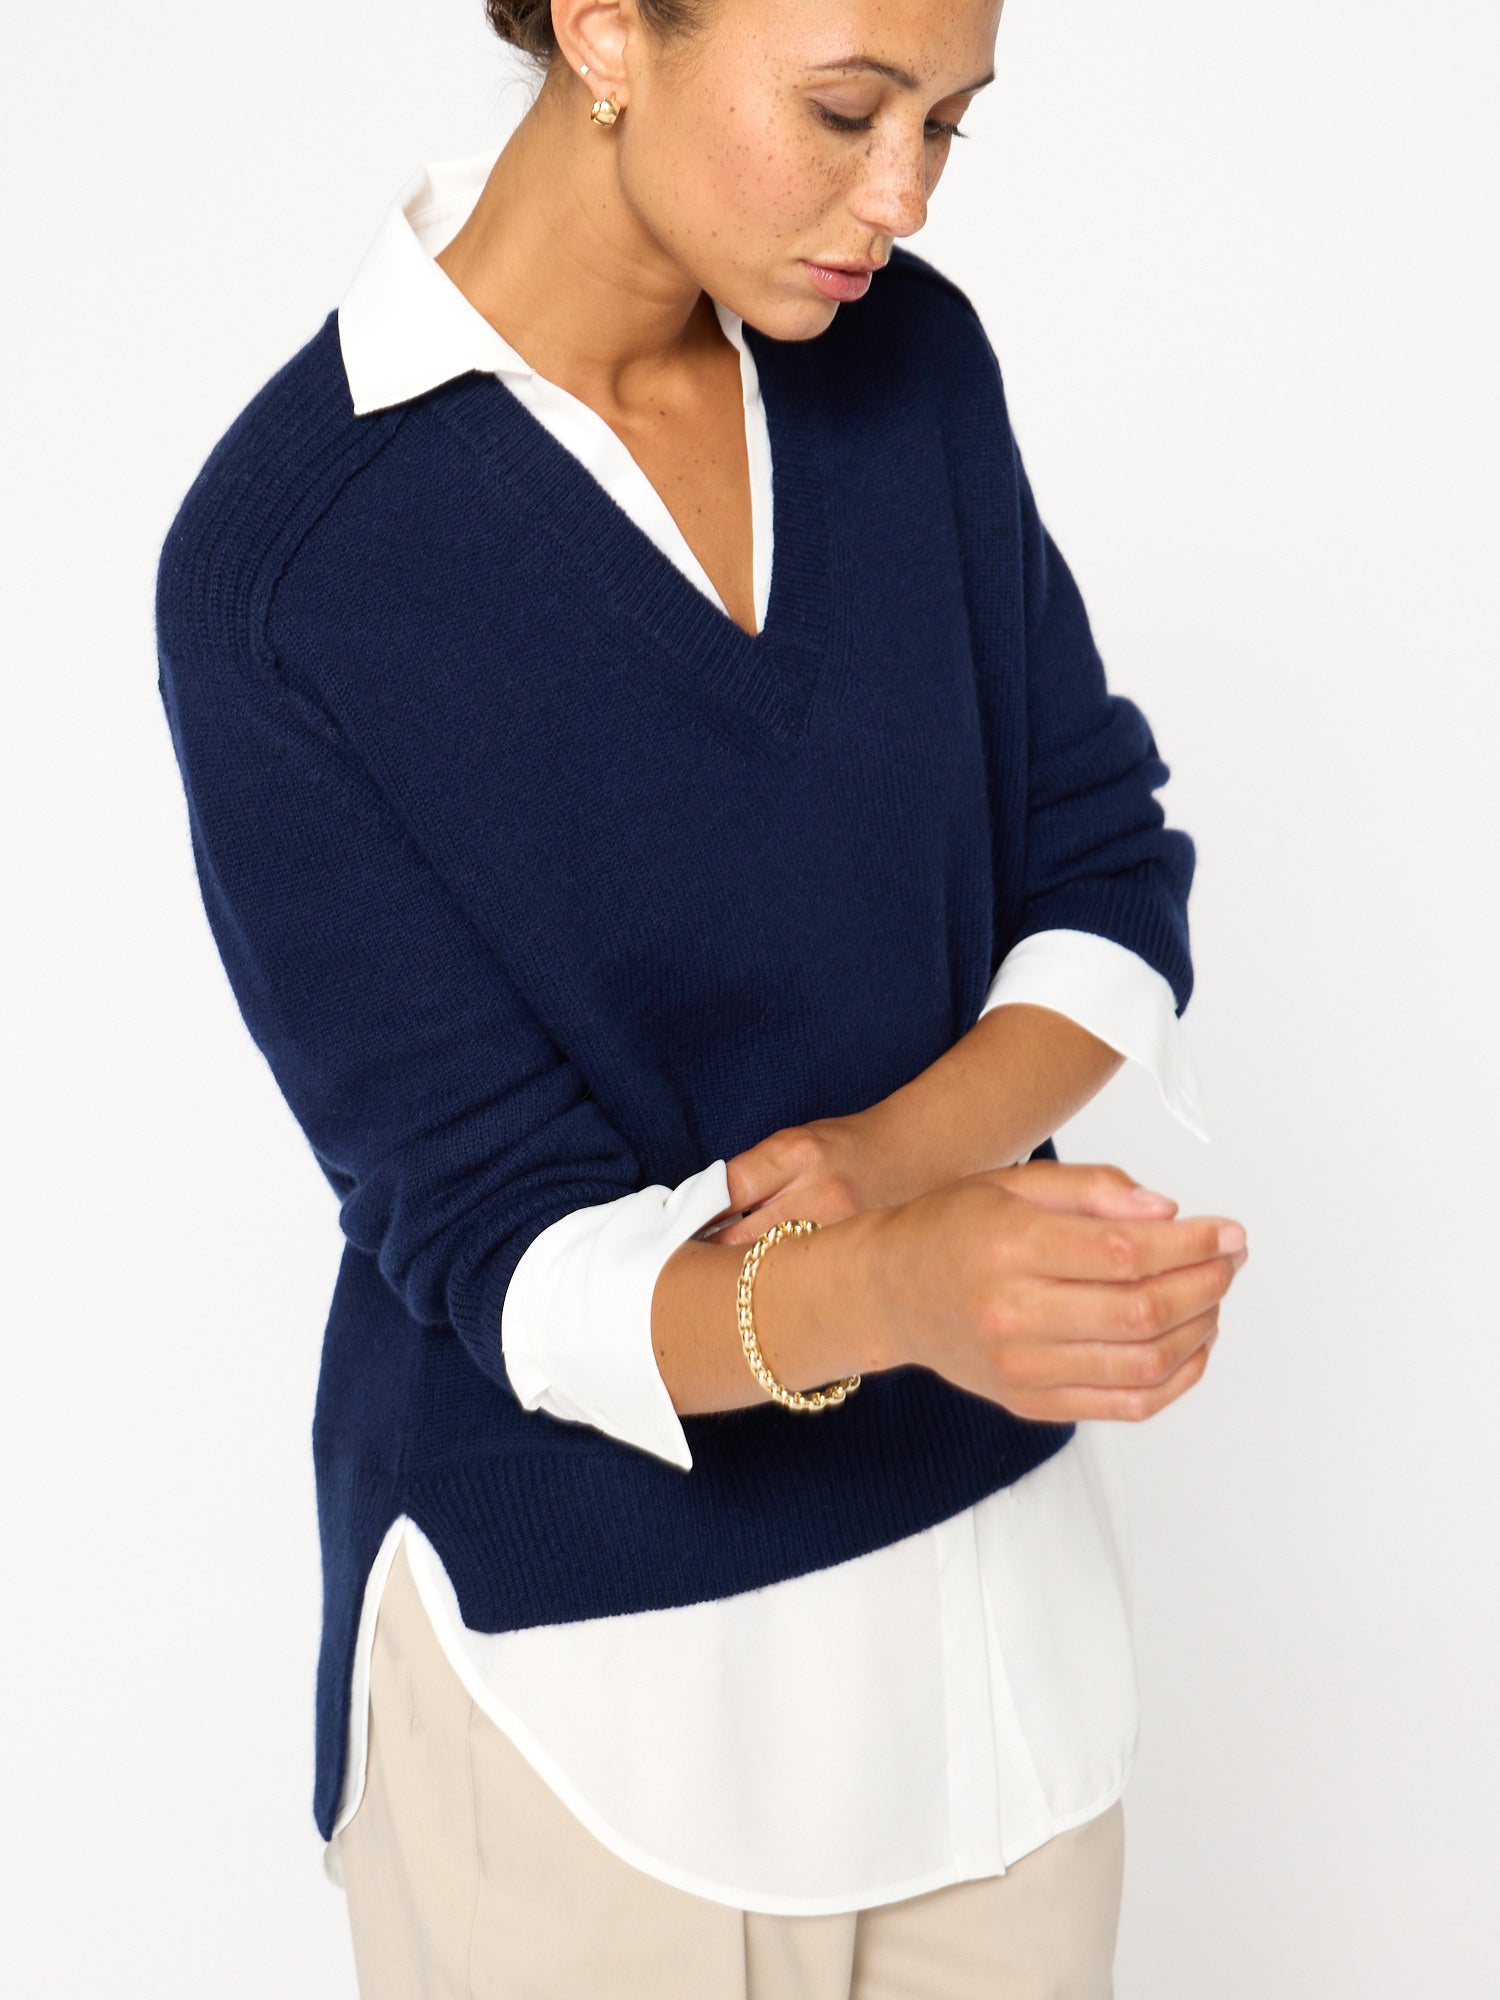 Looker navy layered v-neck sweater side view